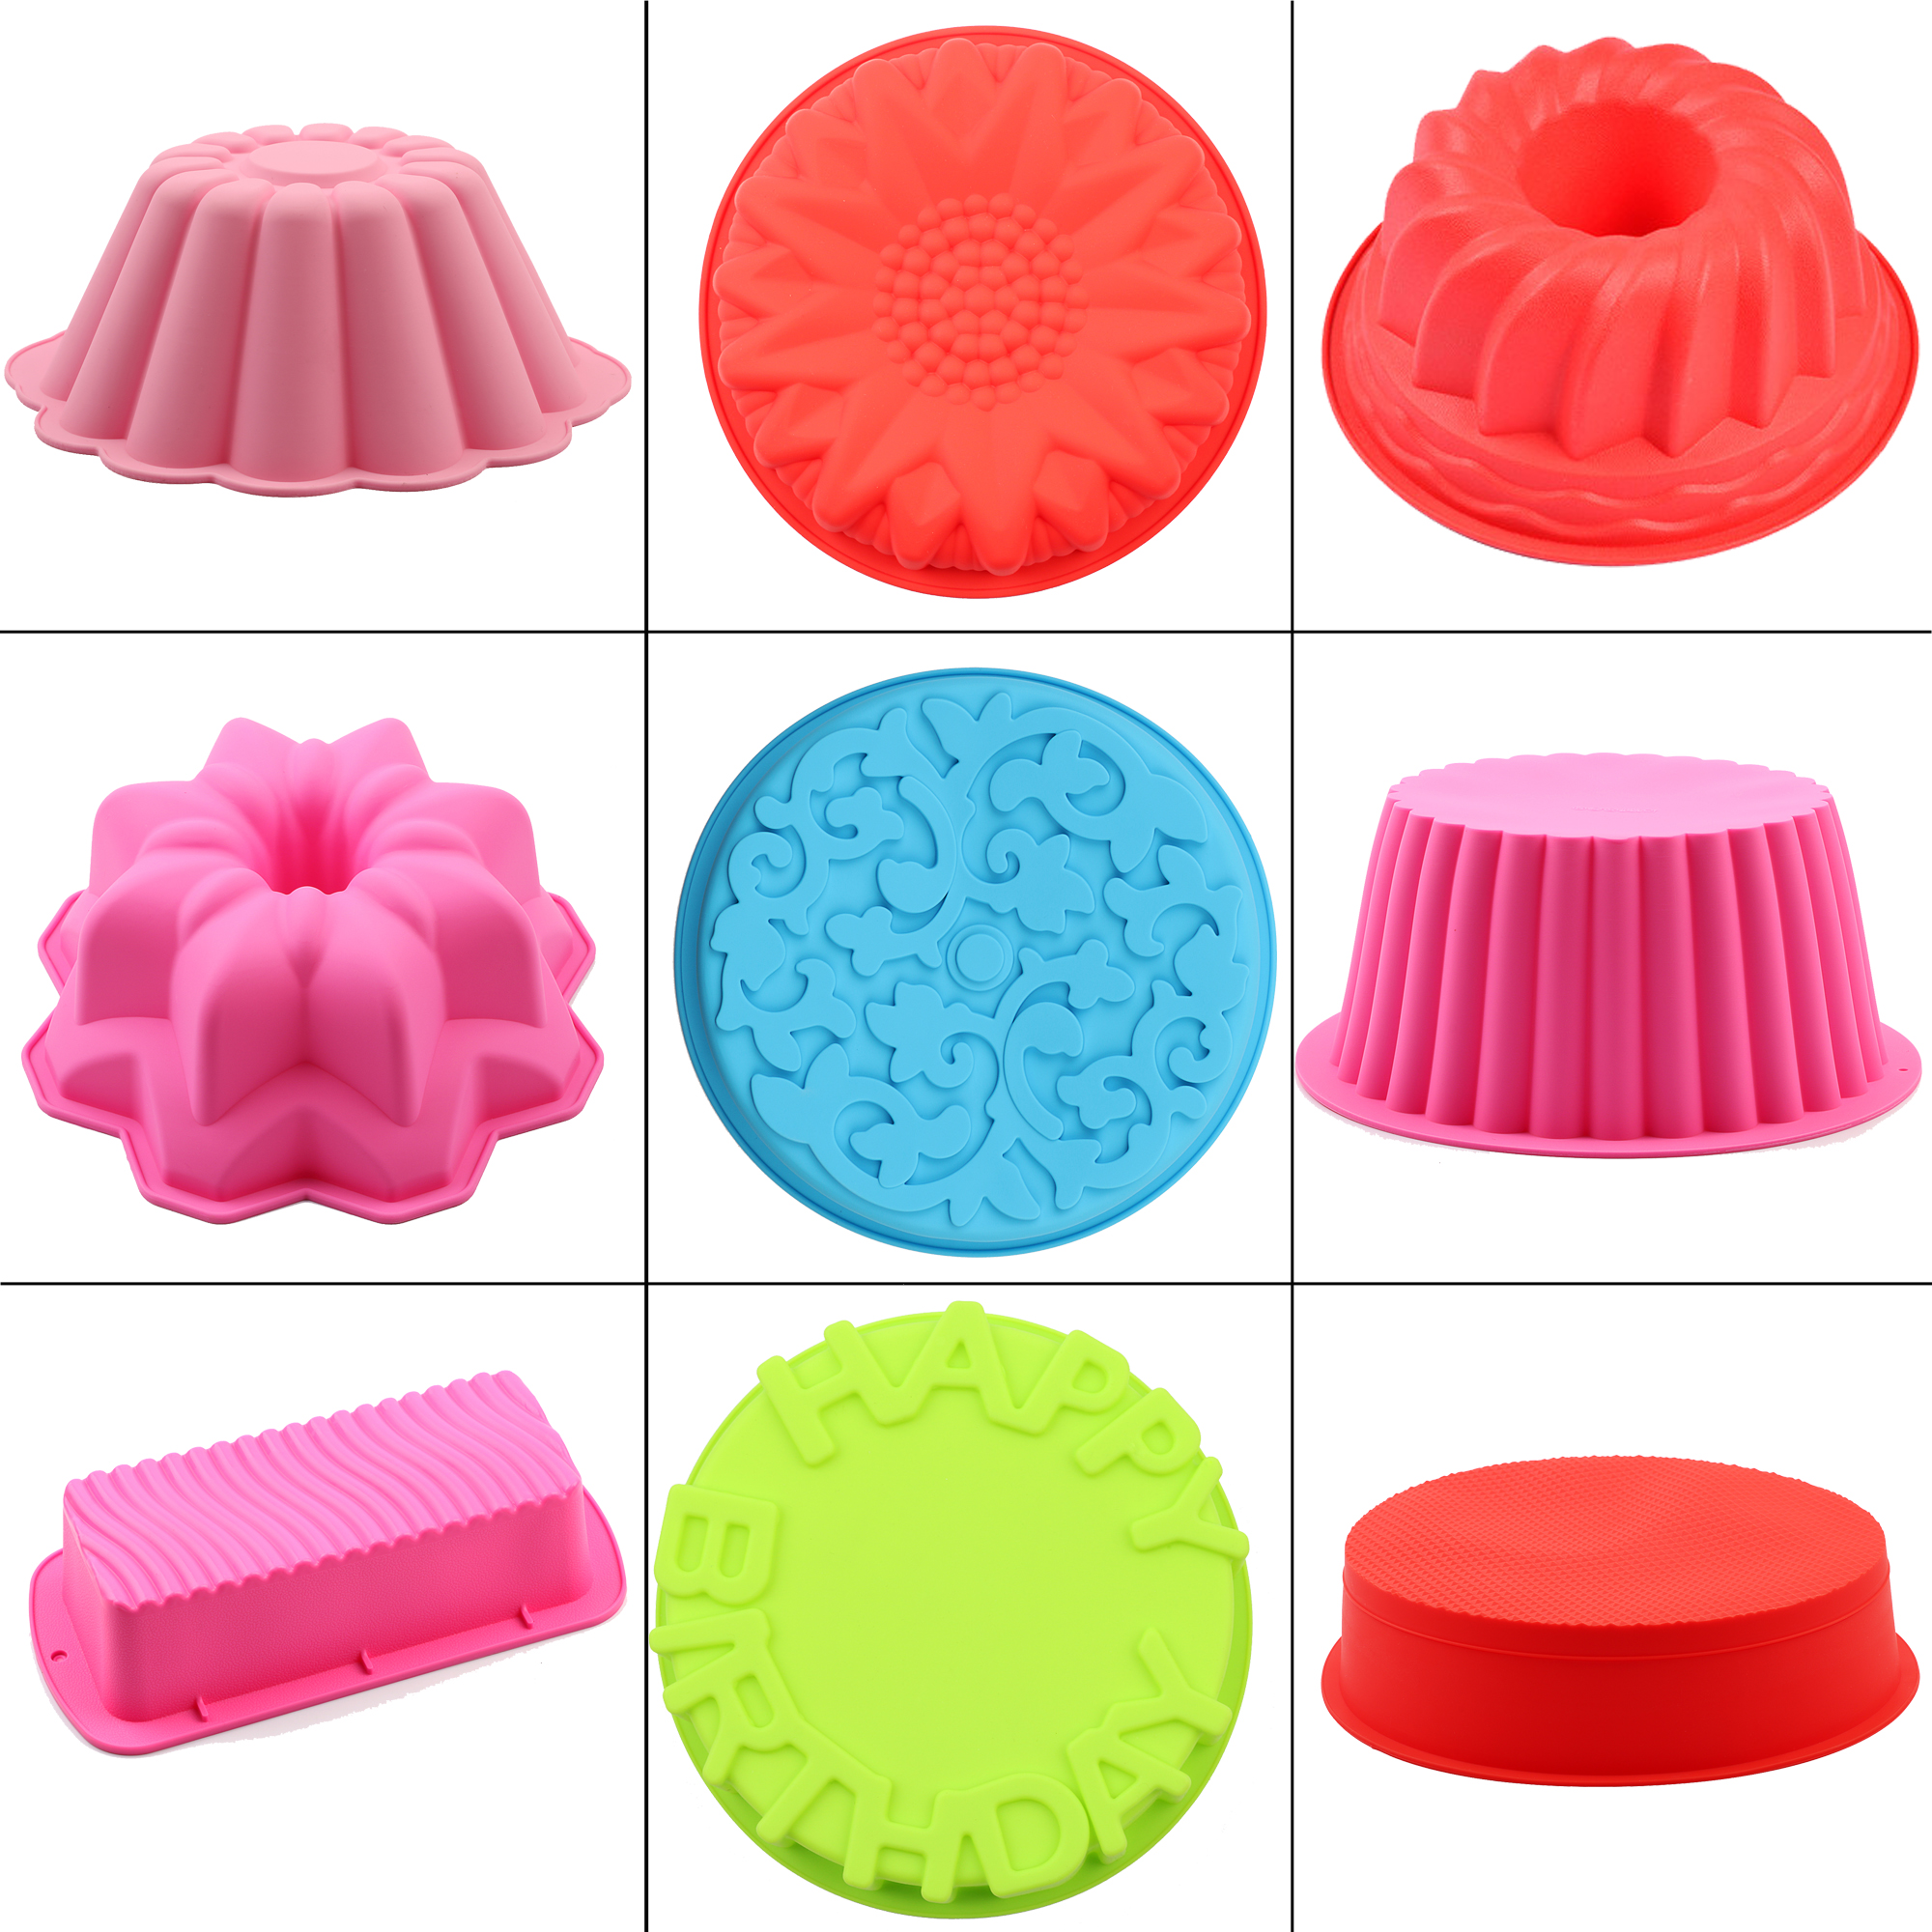 3D DIY Silicone Mold Flower Crown Shape Psatry Baking Tools For Big Cake 